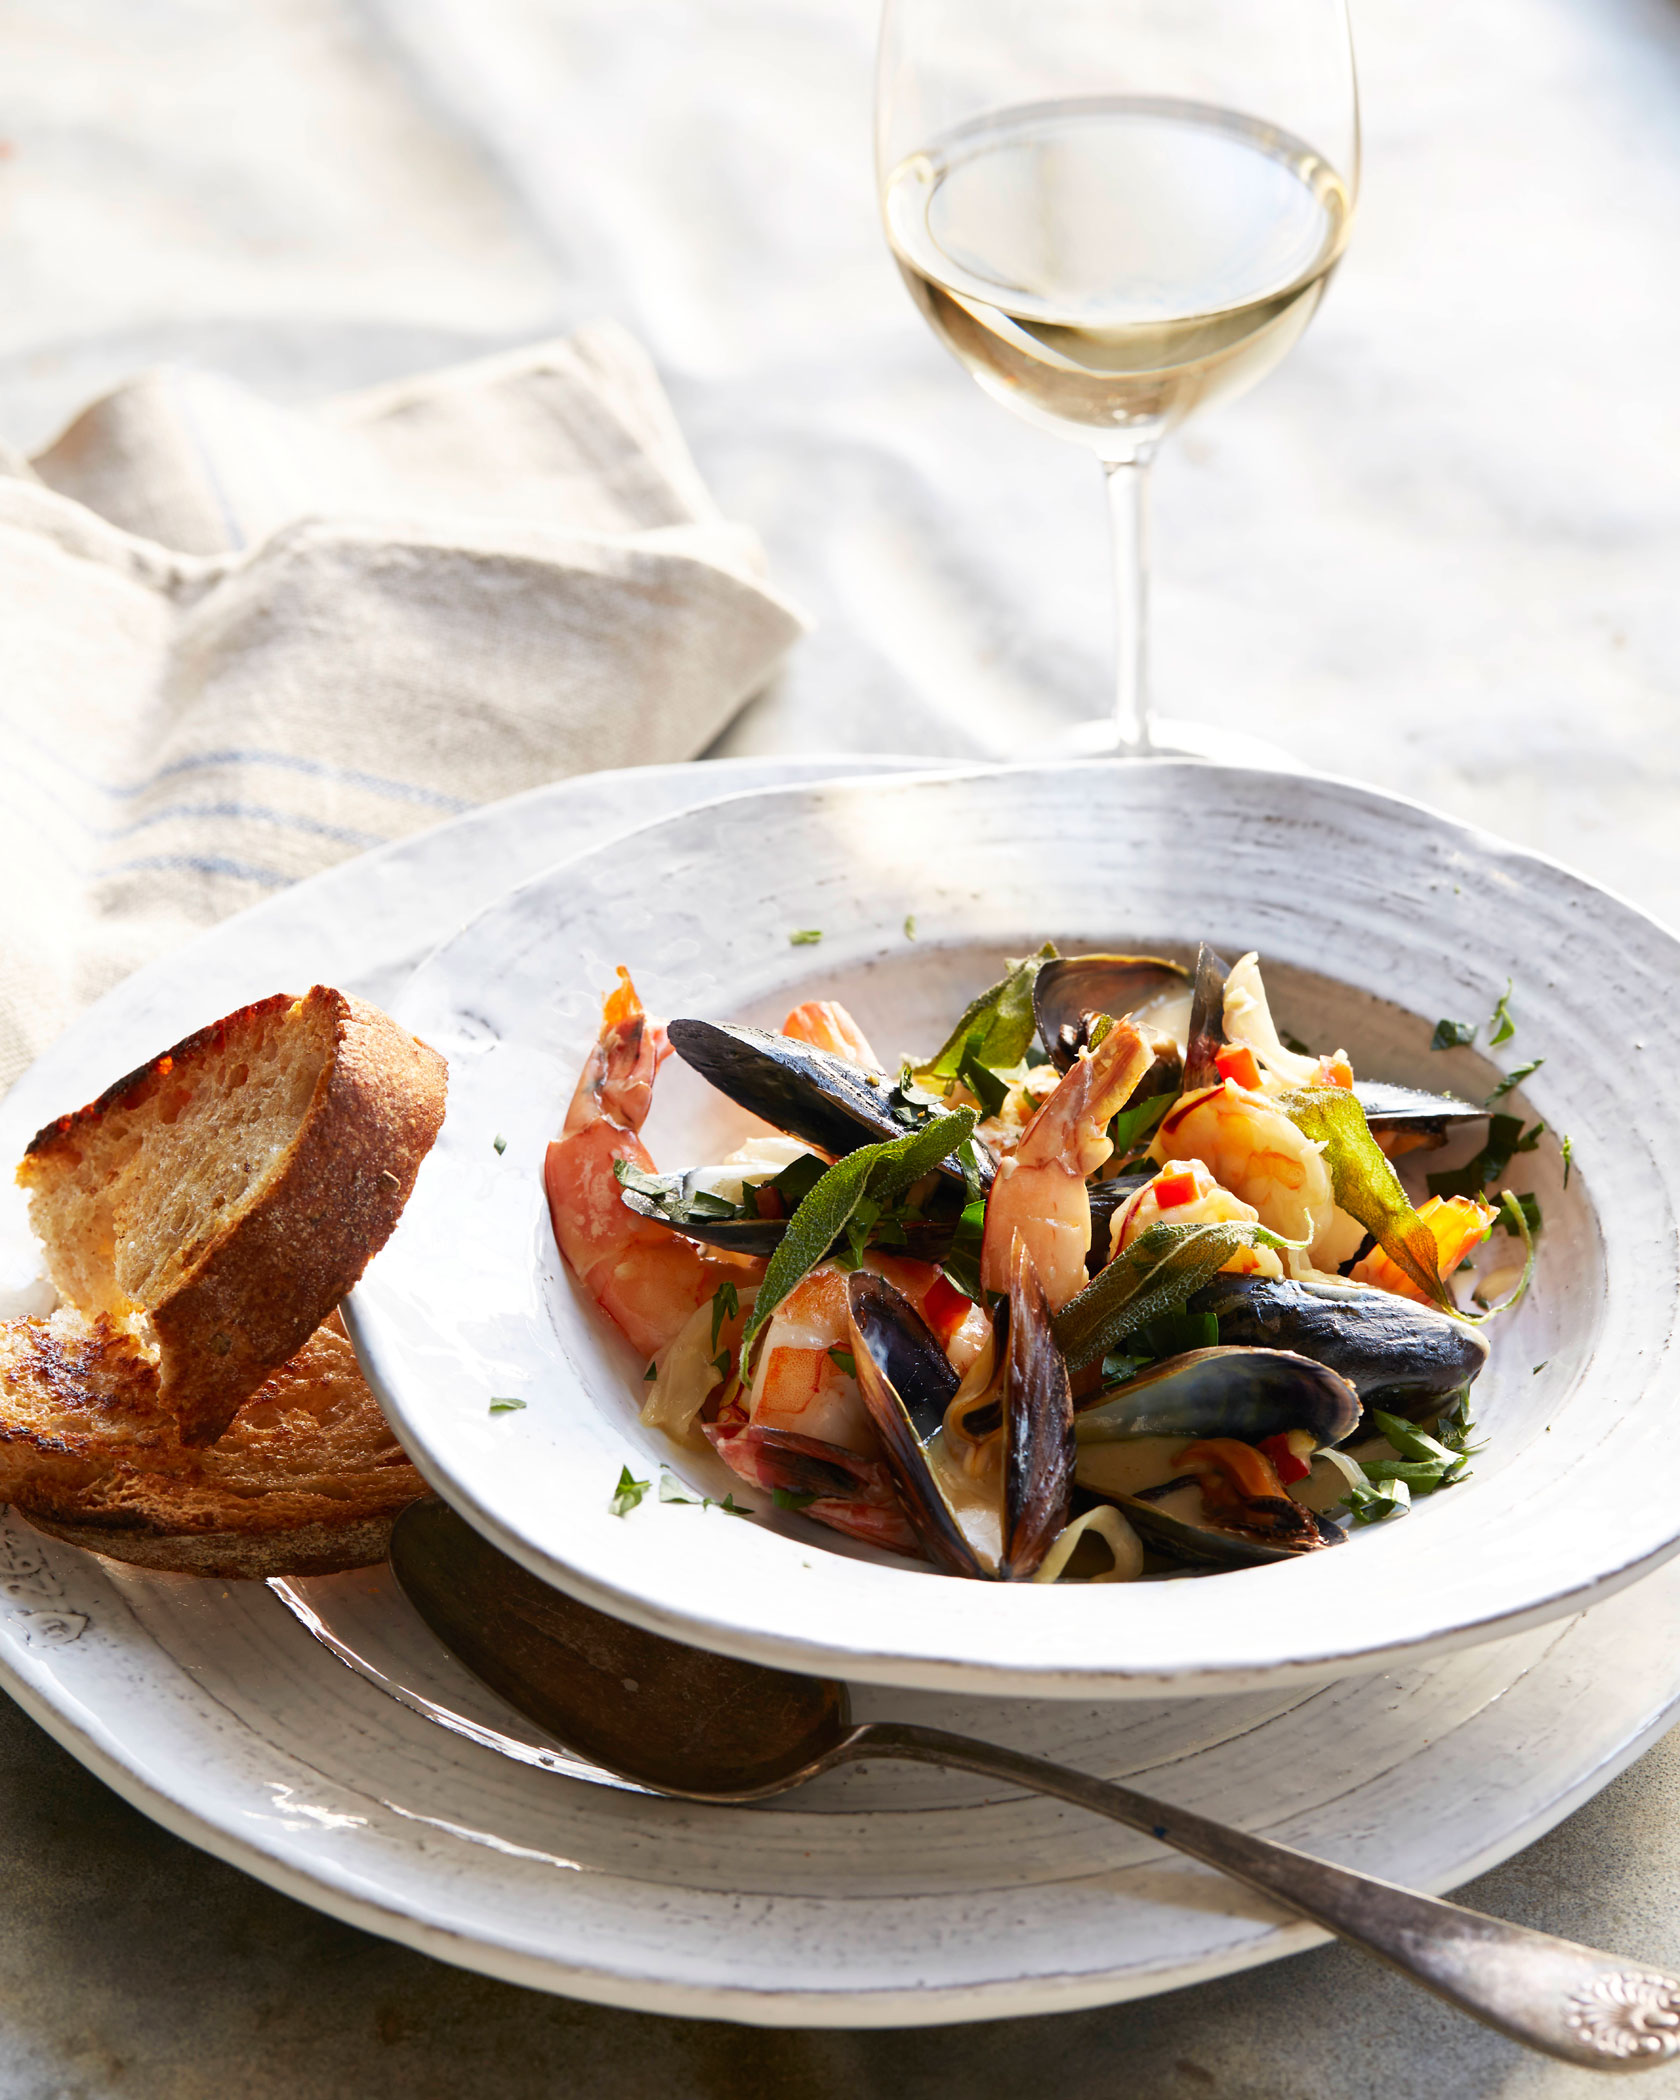 Mussels and Prawns in a Saffron Lemon Cream Sauce with Fried Sage